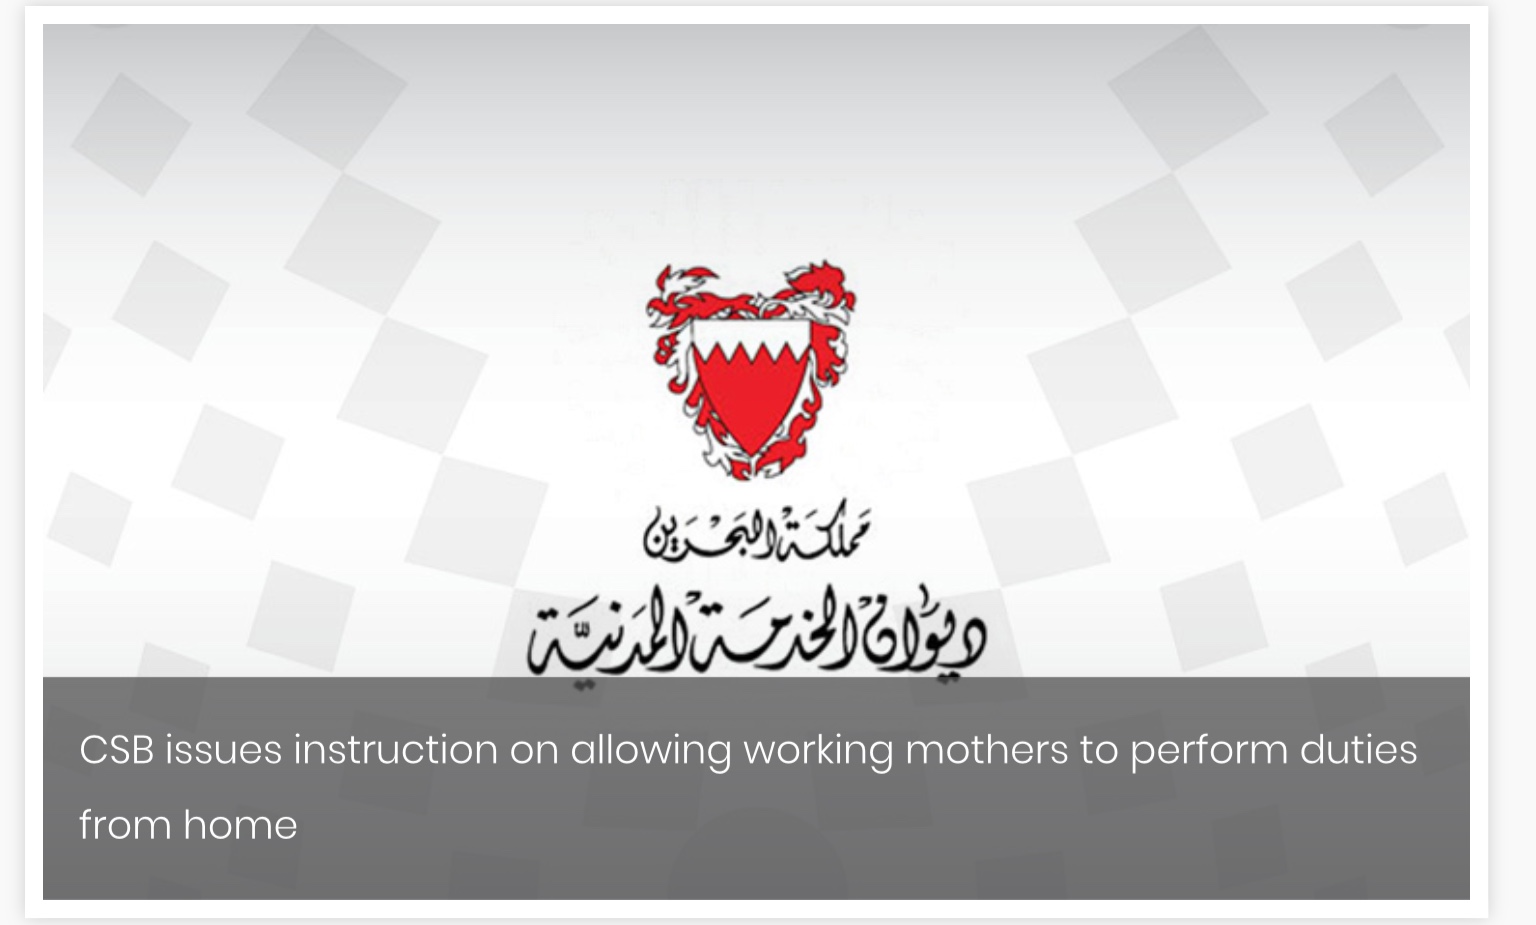 CSB issues instruction on allowing working mothers to perform duties from home